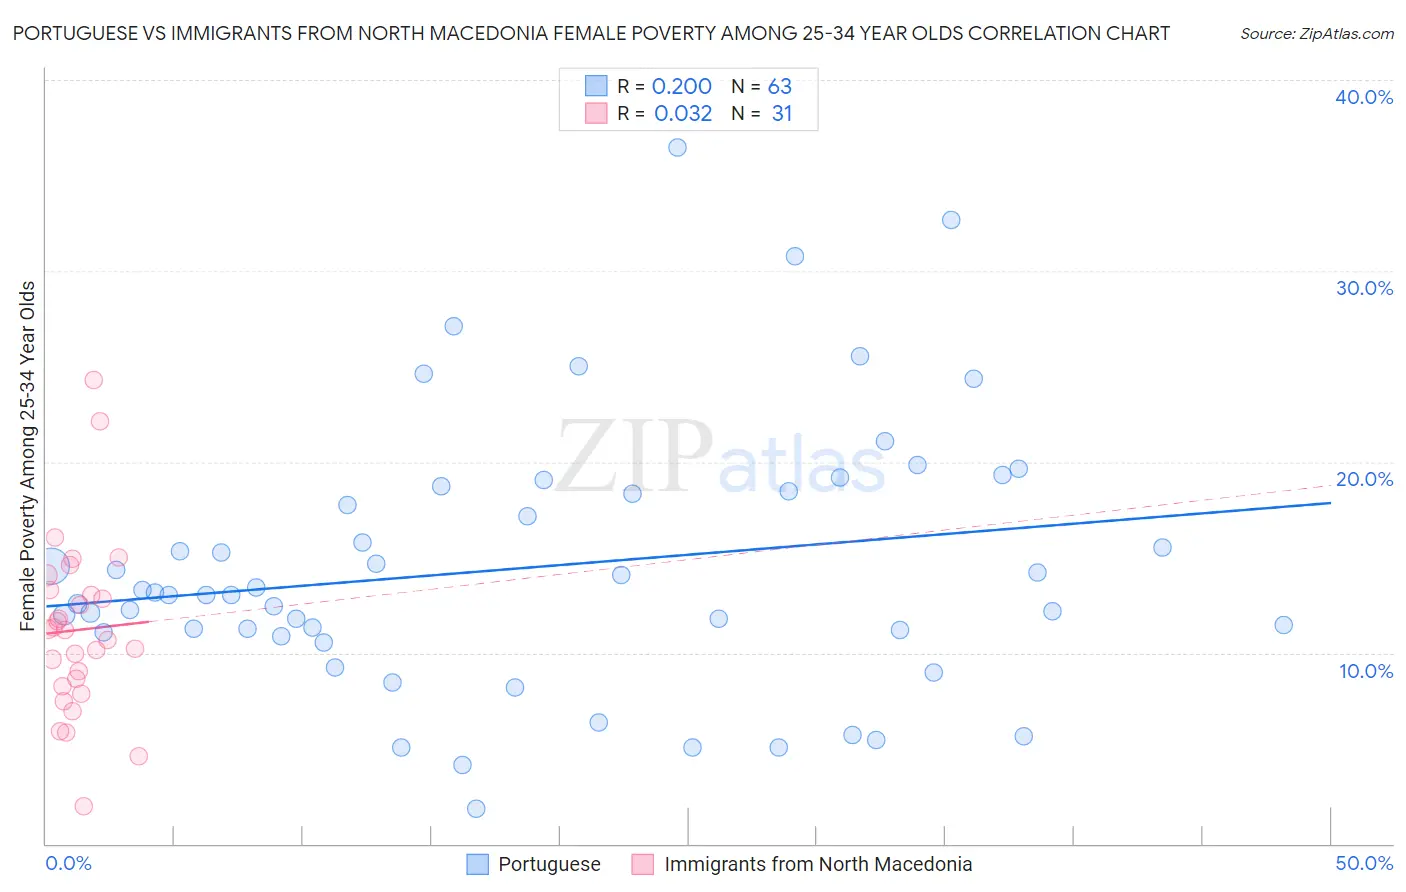 Portuguese vs Immigrants from North Macedonia Female Poverty Among 25-34 Year Olds